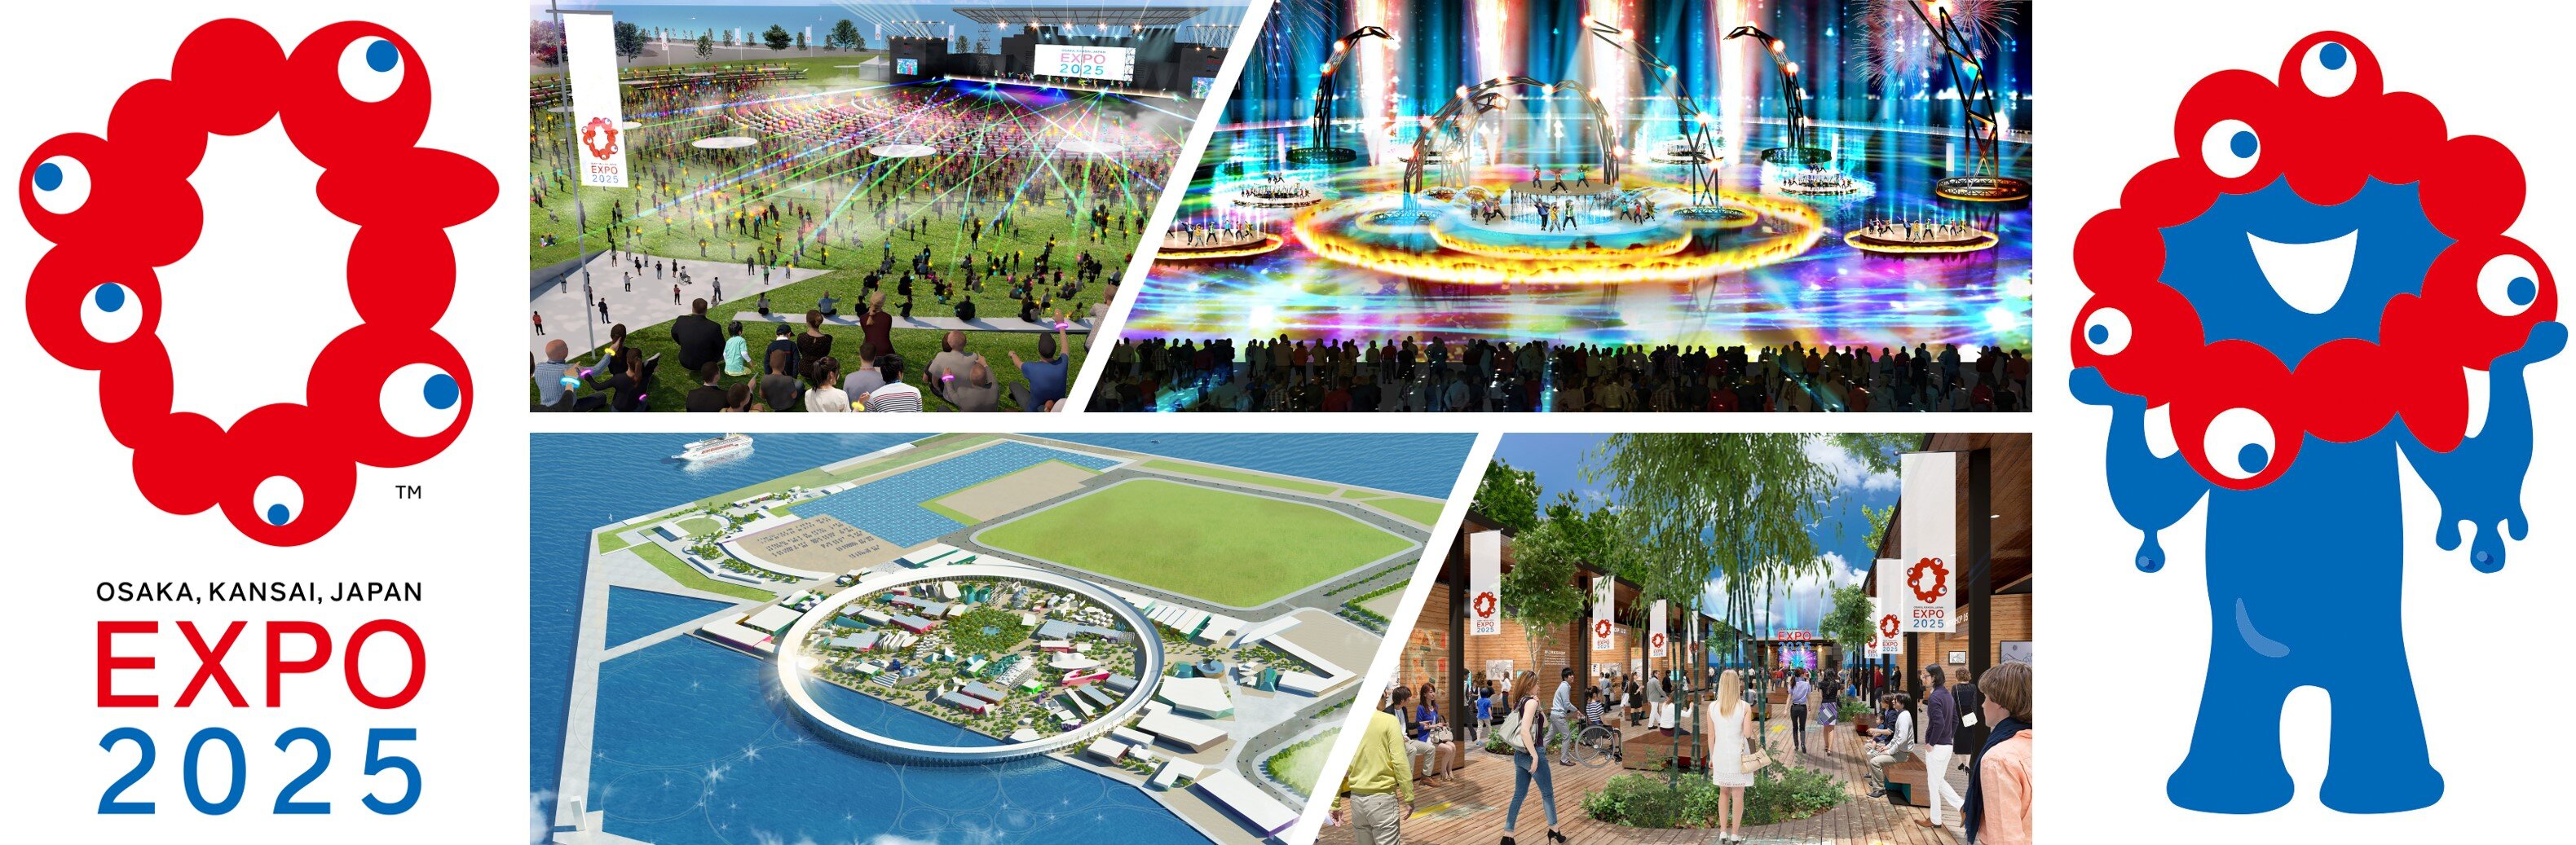 Expo 2025 Osaka, Kansai is only three years away, here is what you